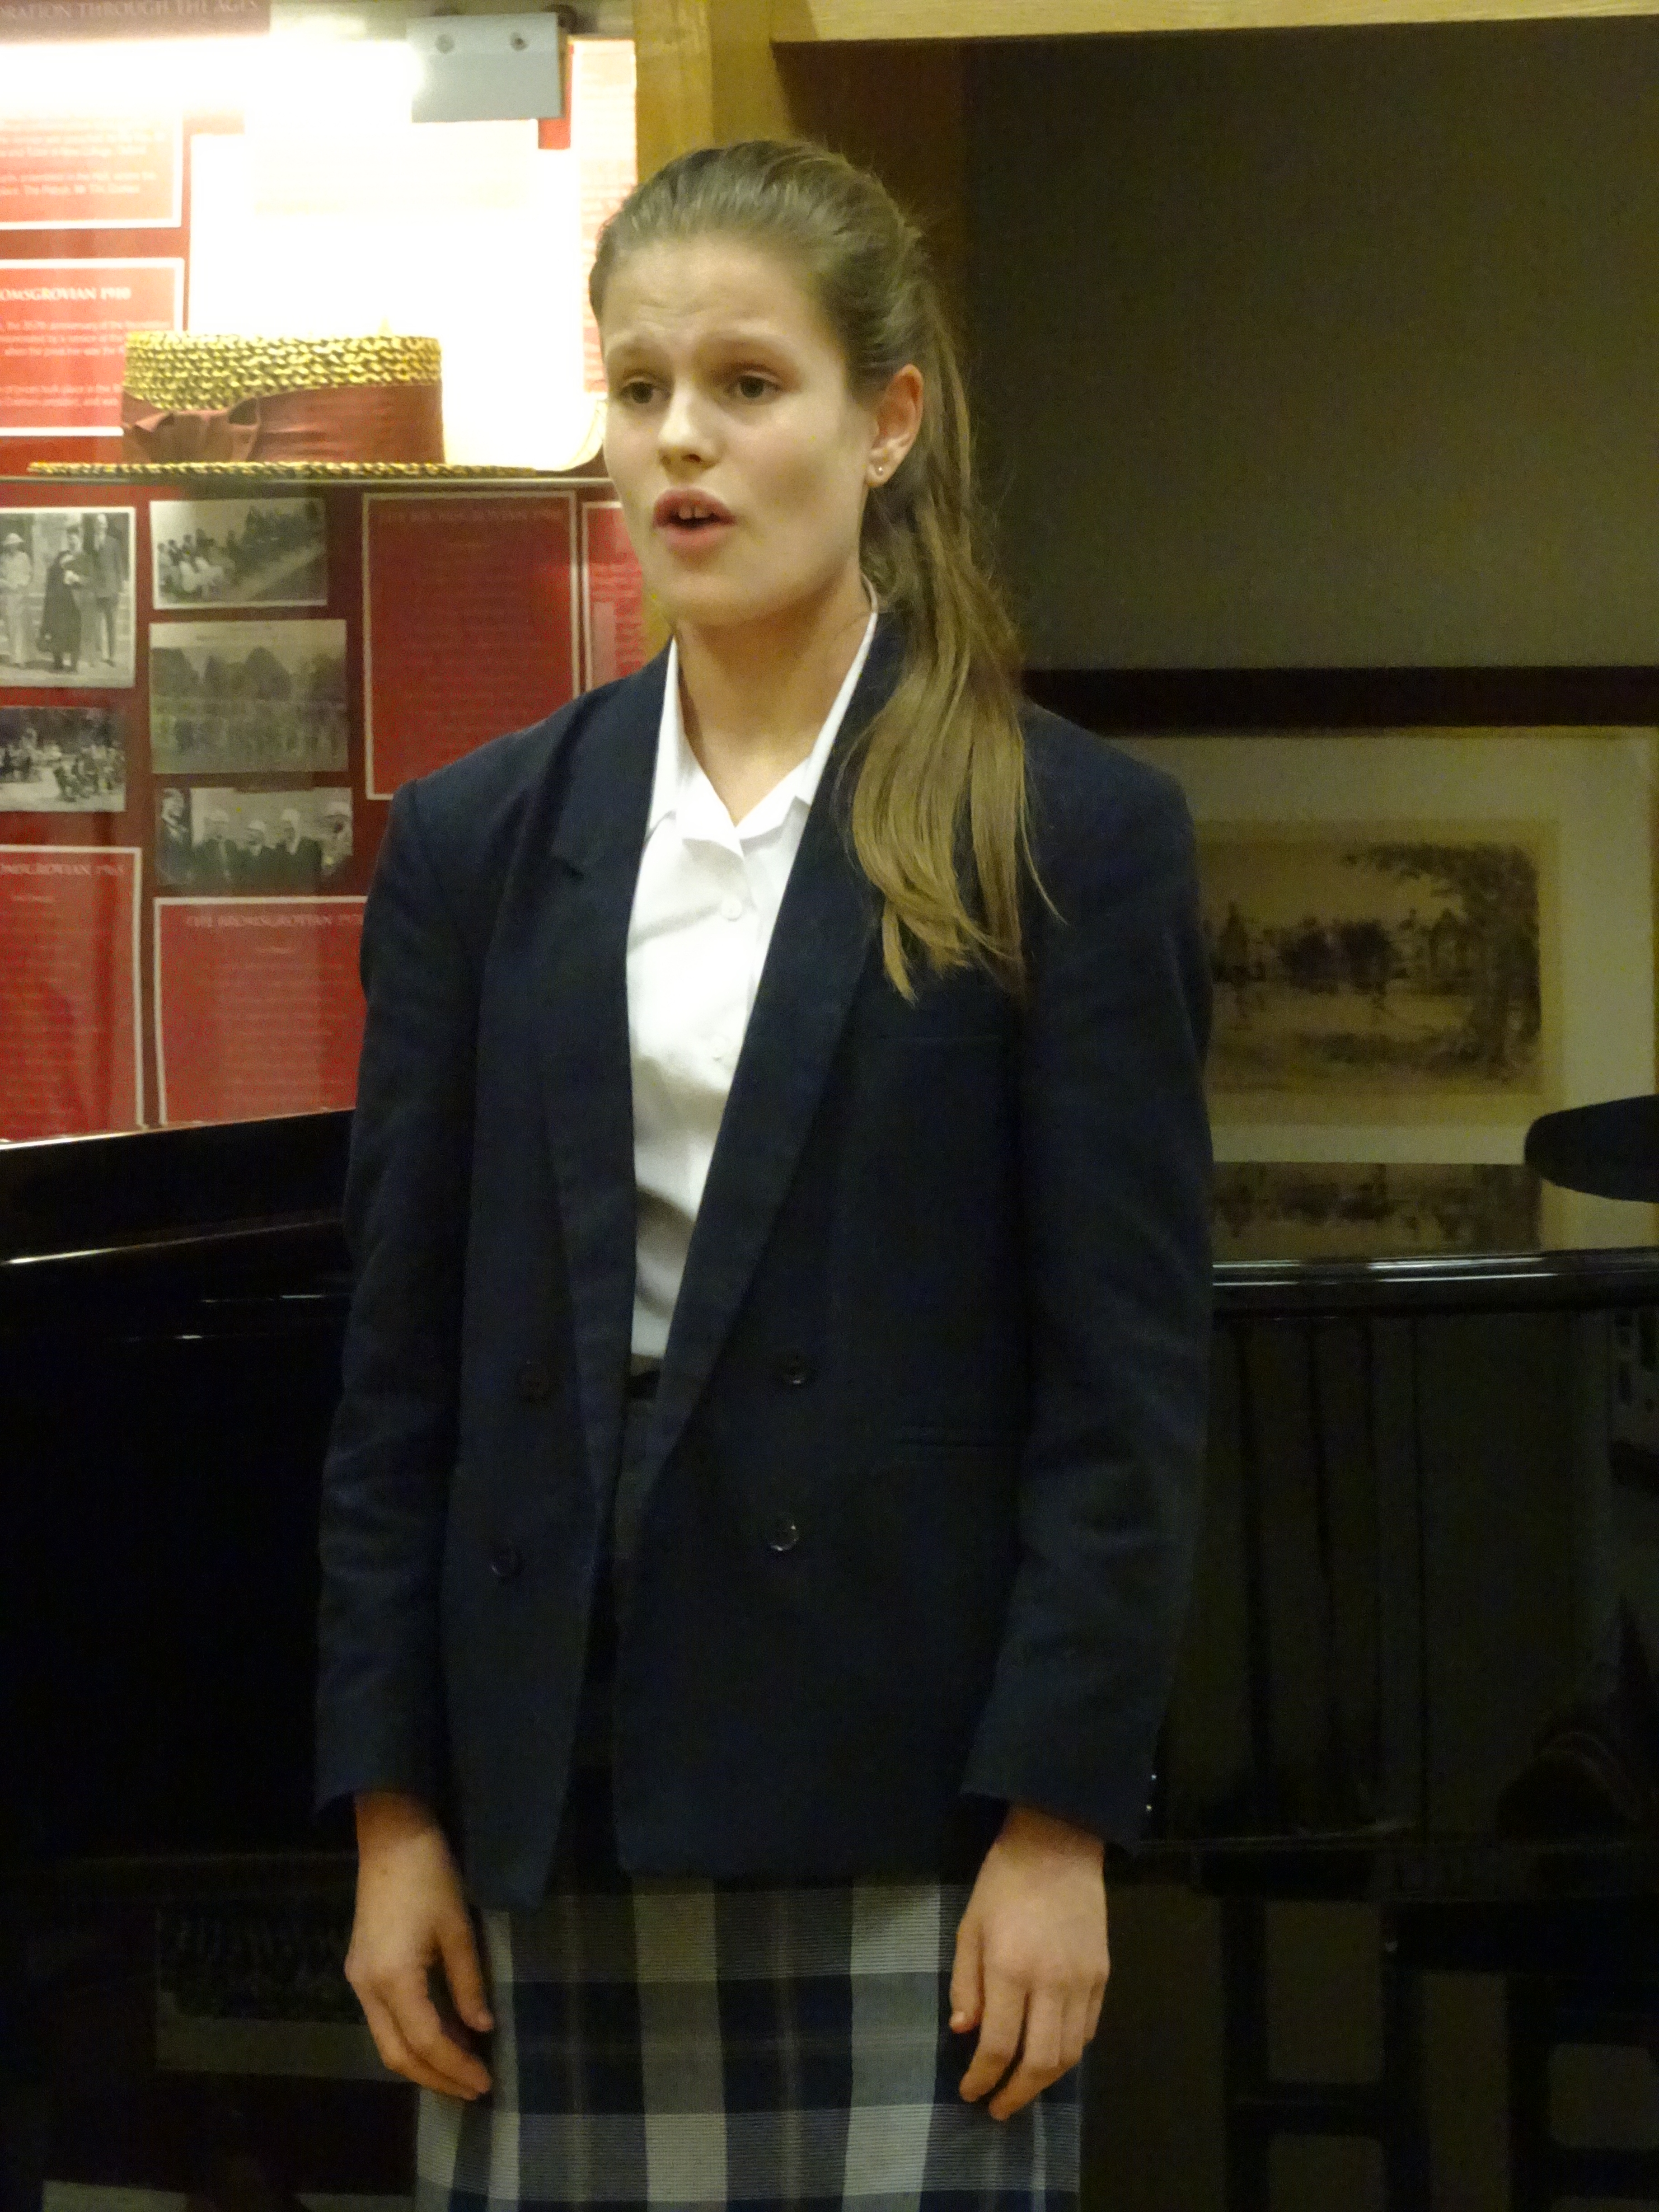 Early Evening Concert, 8th October 2015 - Olivia D (Voice)